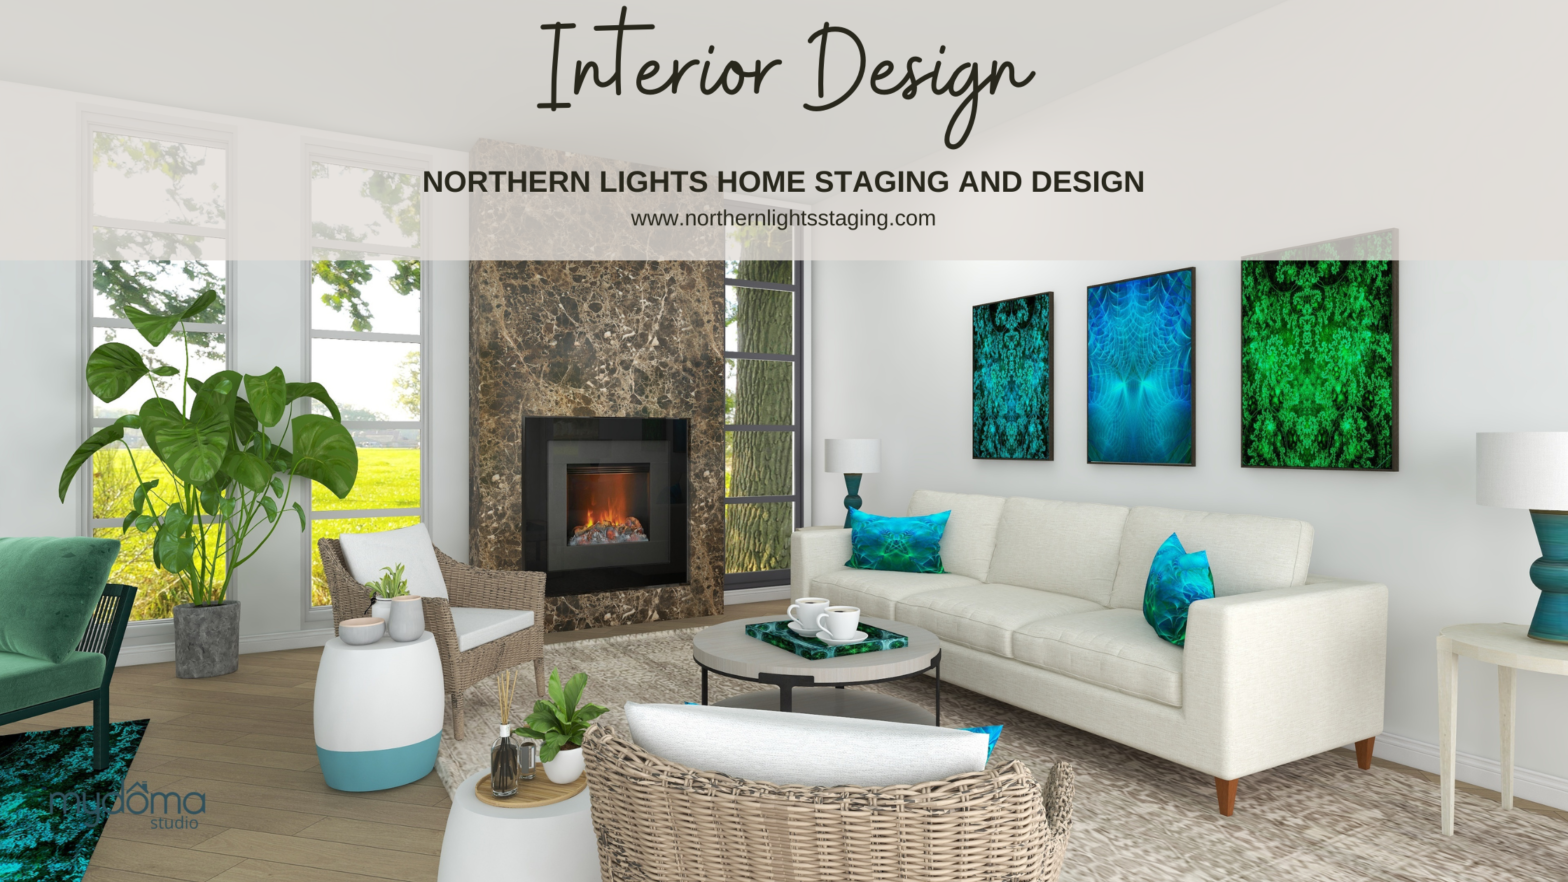 Interior Design by Northern Lights Home Staging and Design